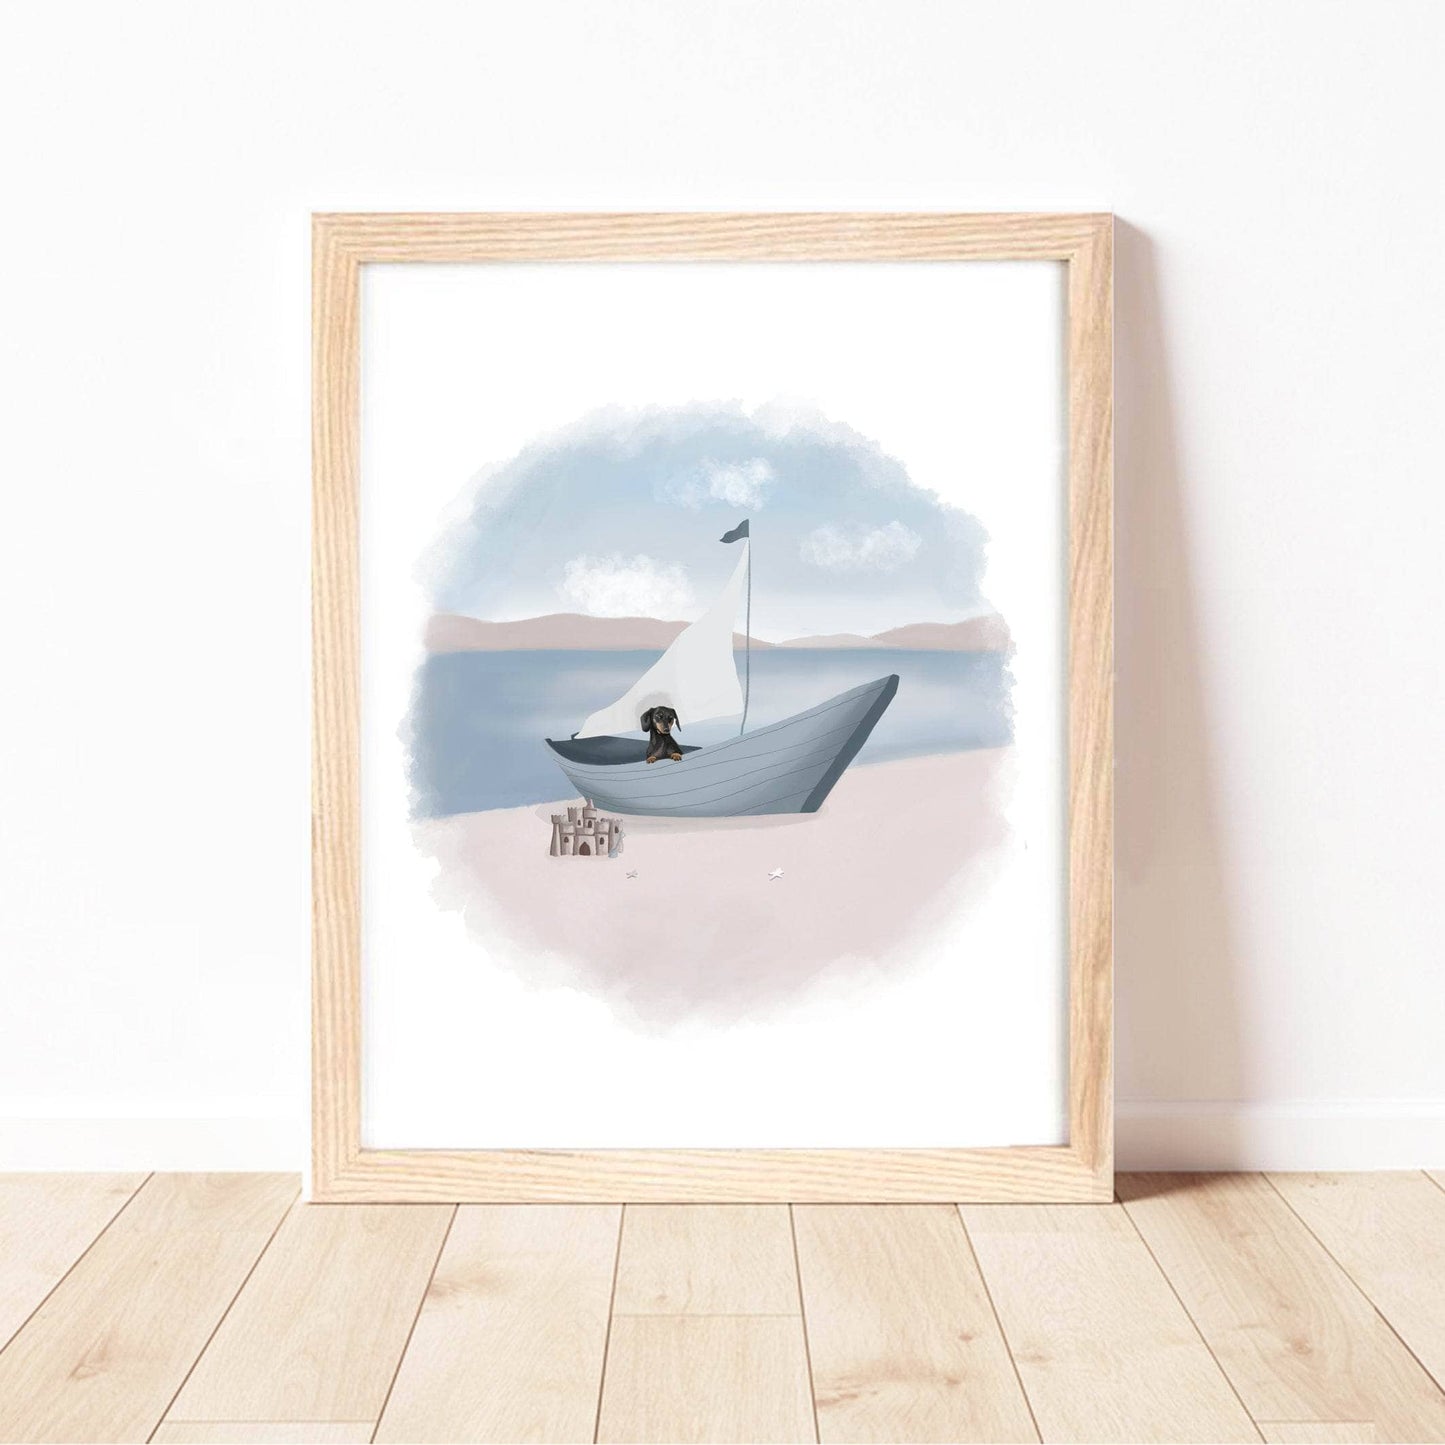 Dogs on Adventures Wall Art Print | Boat